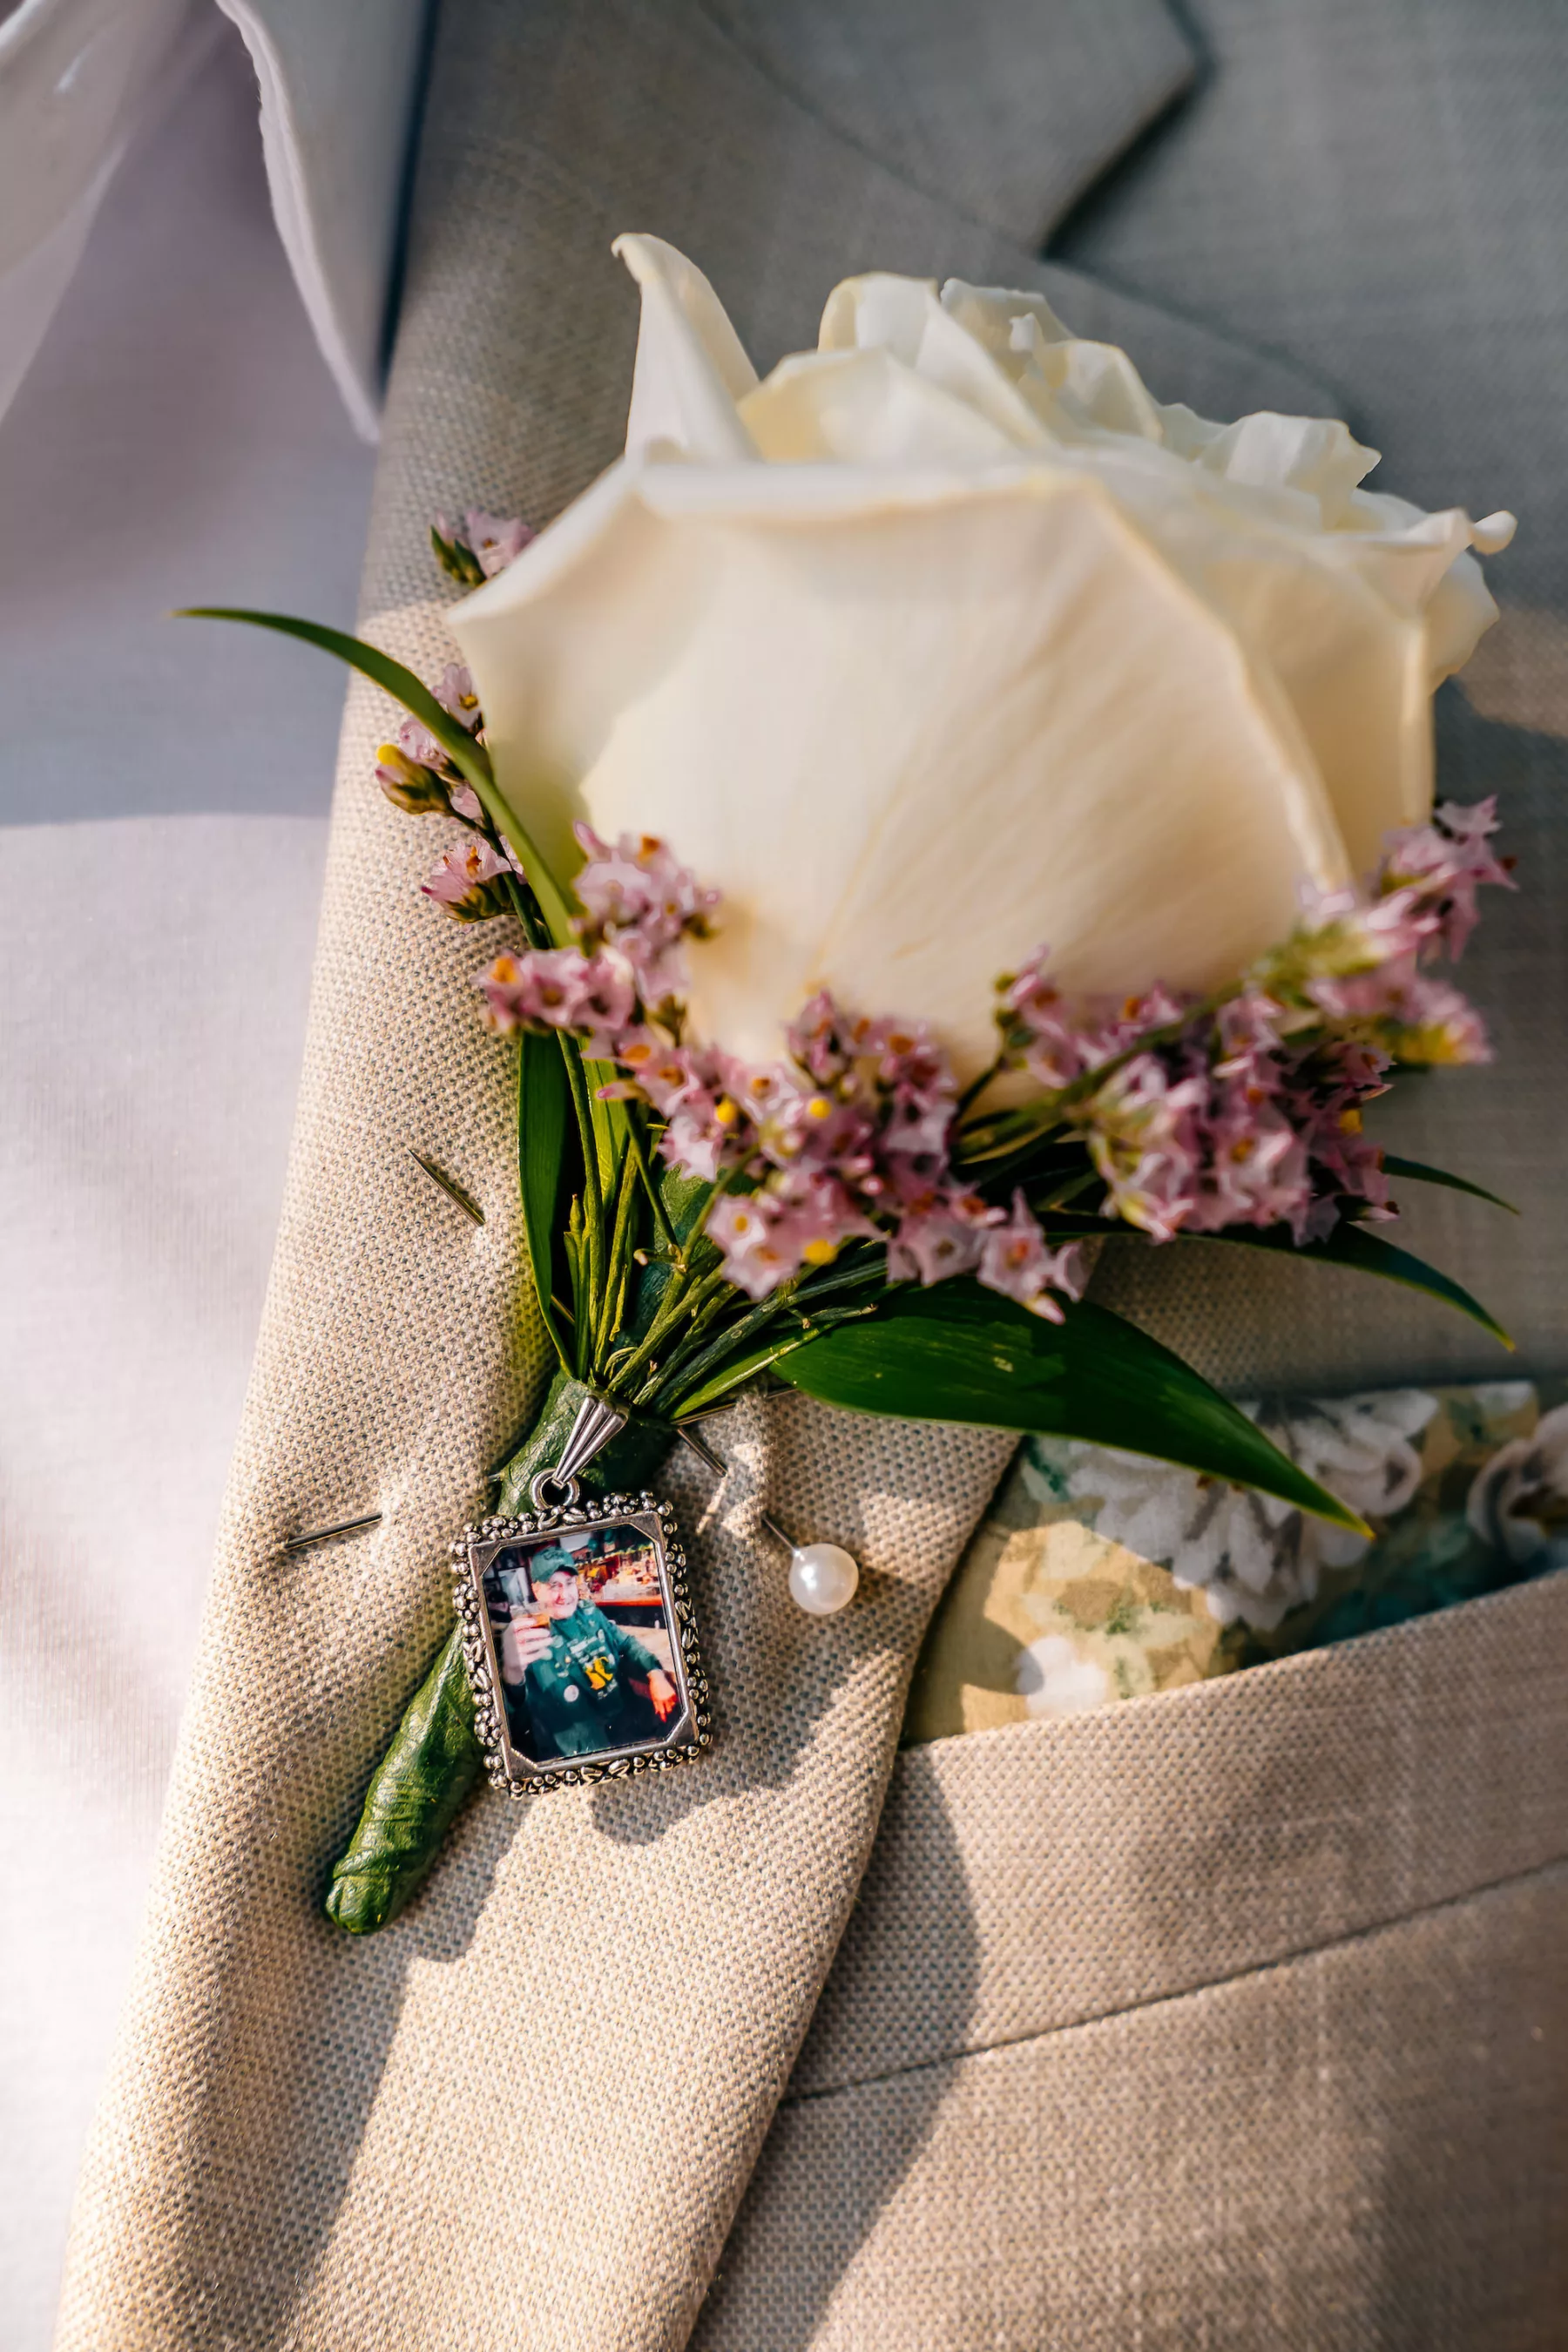 Groom's White Rose Boutonniere with Memorial Charm Inspiration